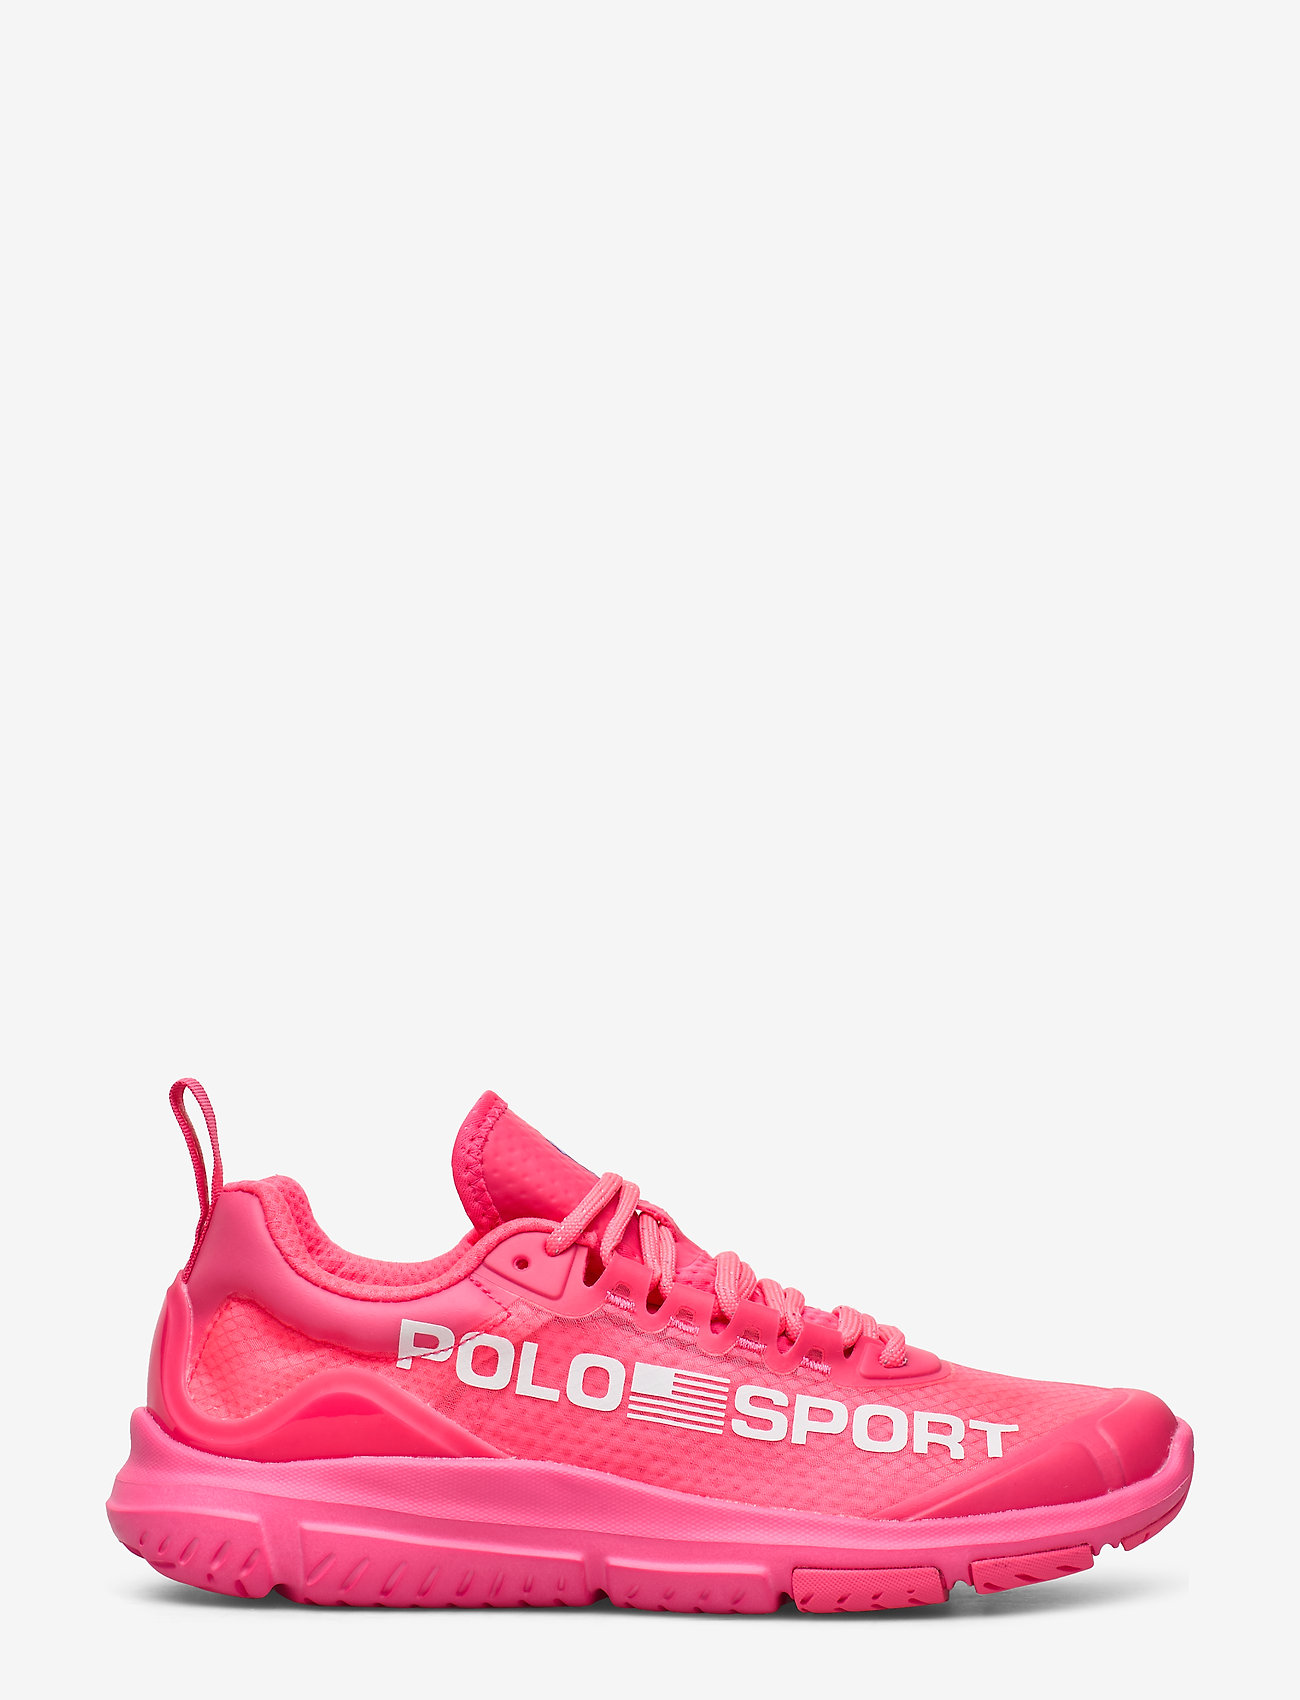 polo pink sneakers